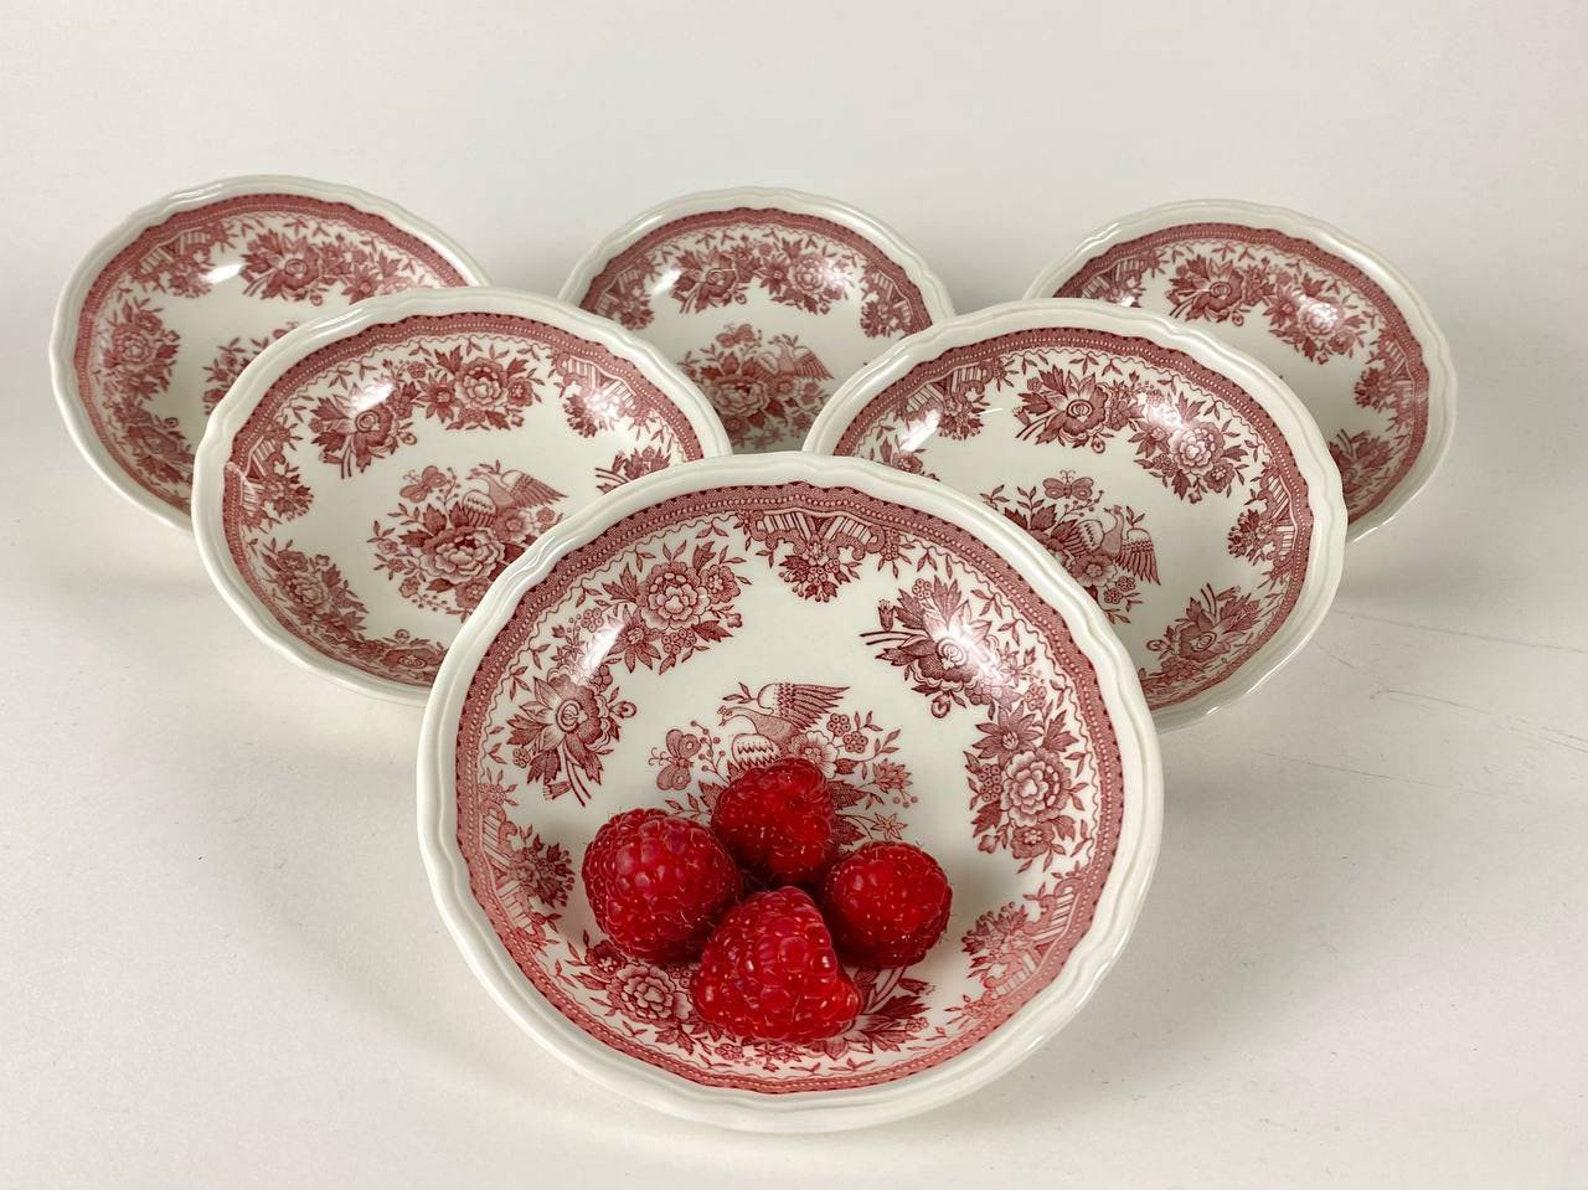 Small Porcelain Bowls produced by Villeroy and Boch.

Vitro porcelain bowls. 

Red Fasan series. 

Germany. 

An interesting, worthy thing for serving a festive table.

A Bowl for serving the table will provide a beautiful presentation of